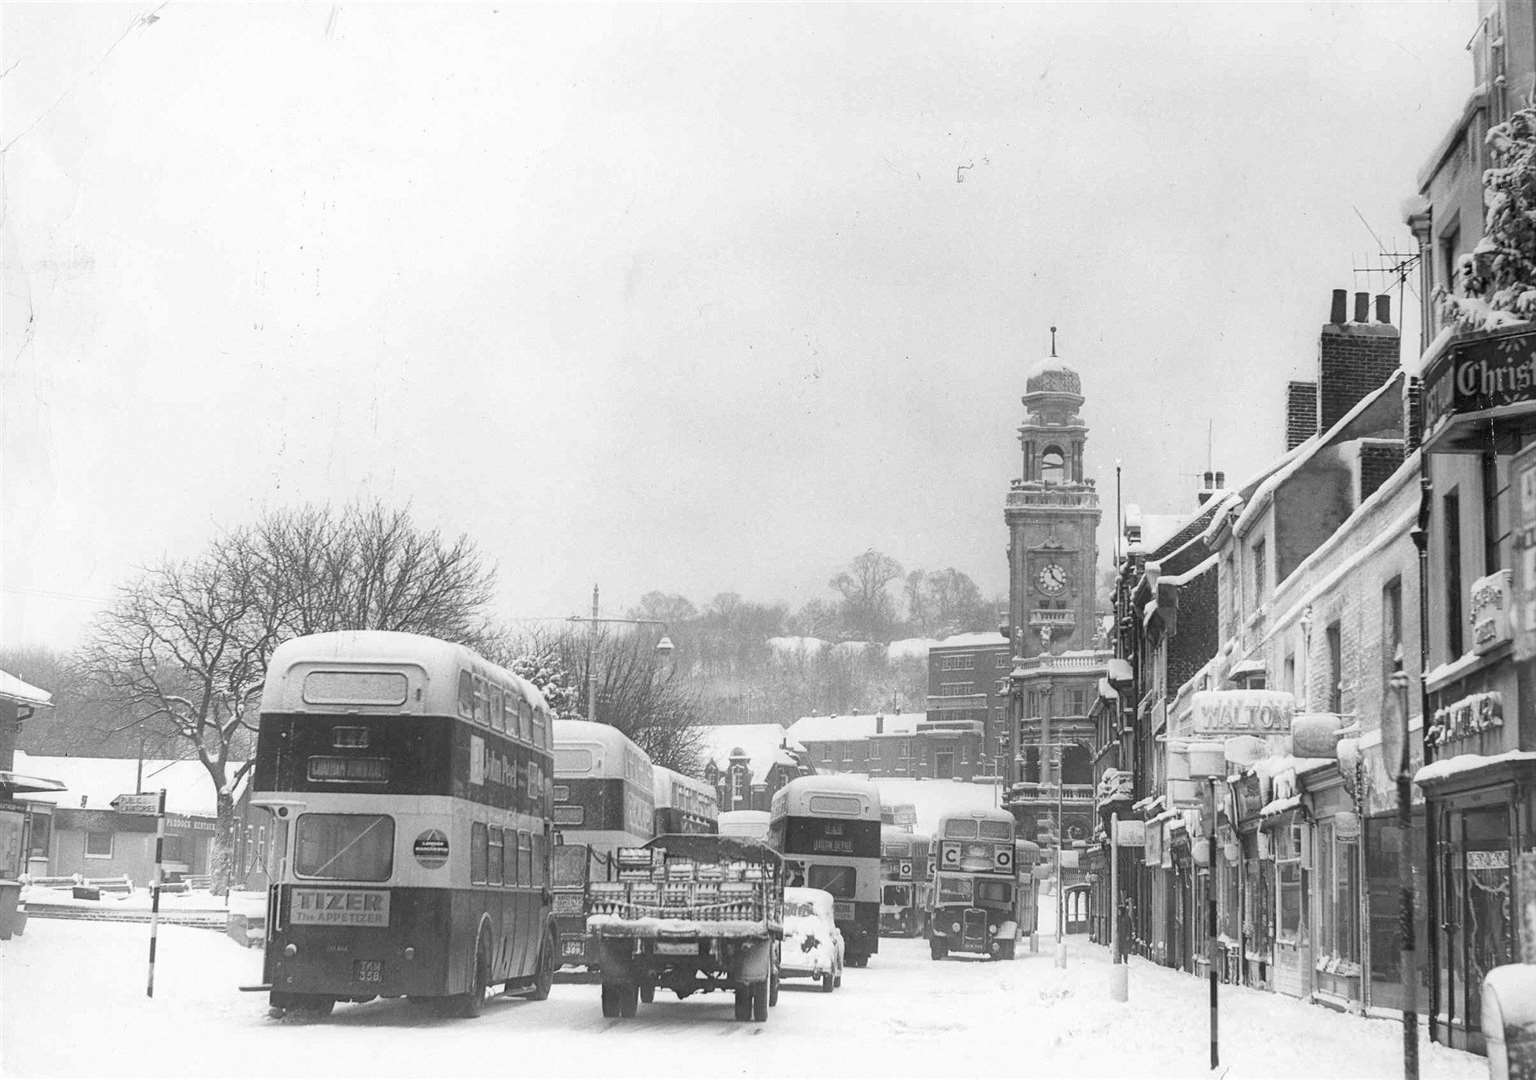 The buses struggled on during the severe winter of 1962-3, but there was not much other business in Military Road, Chatham, on this day